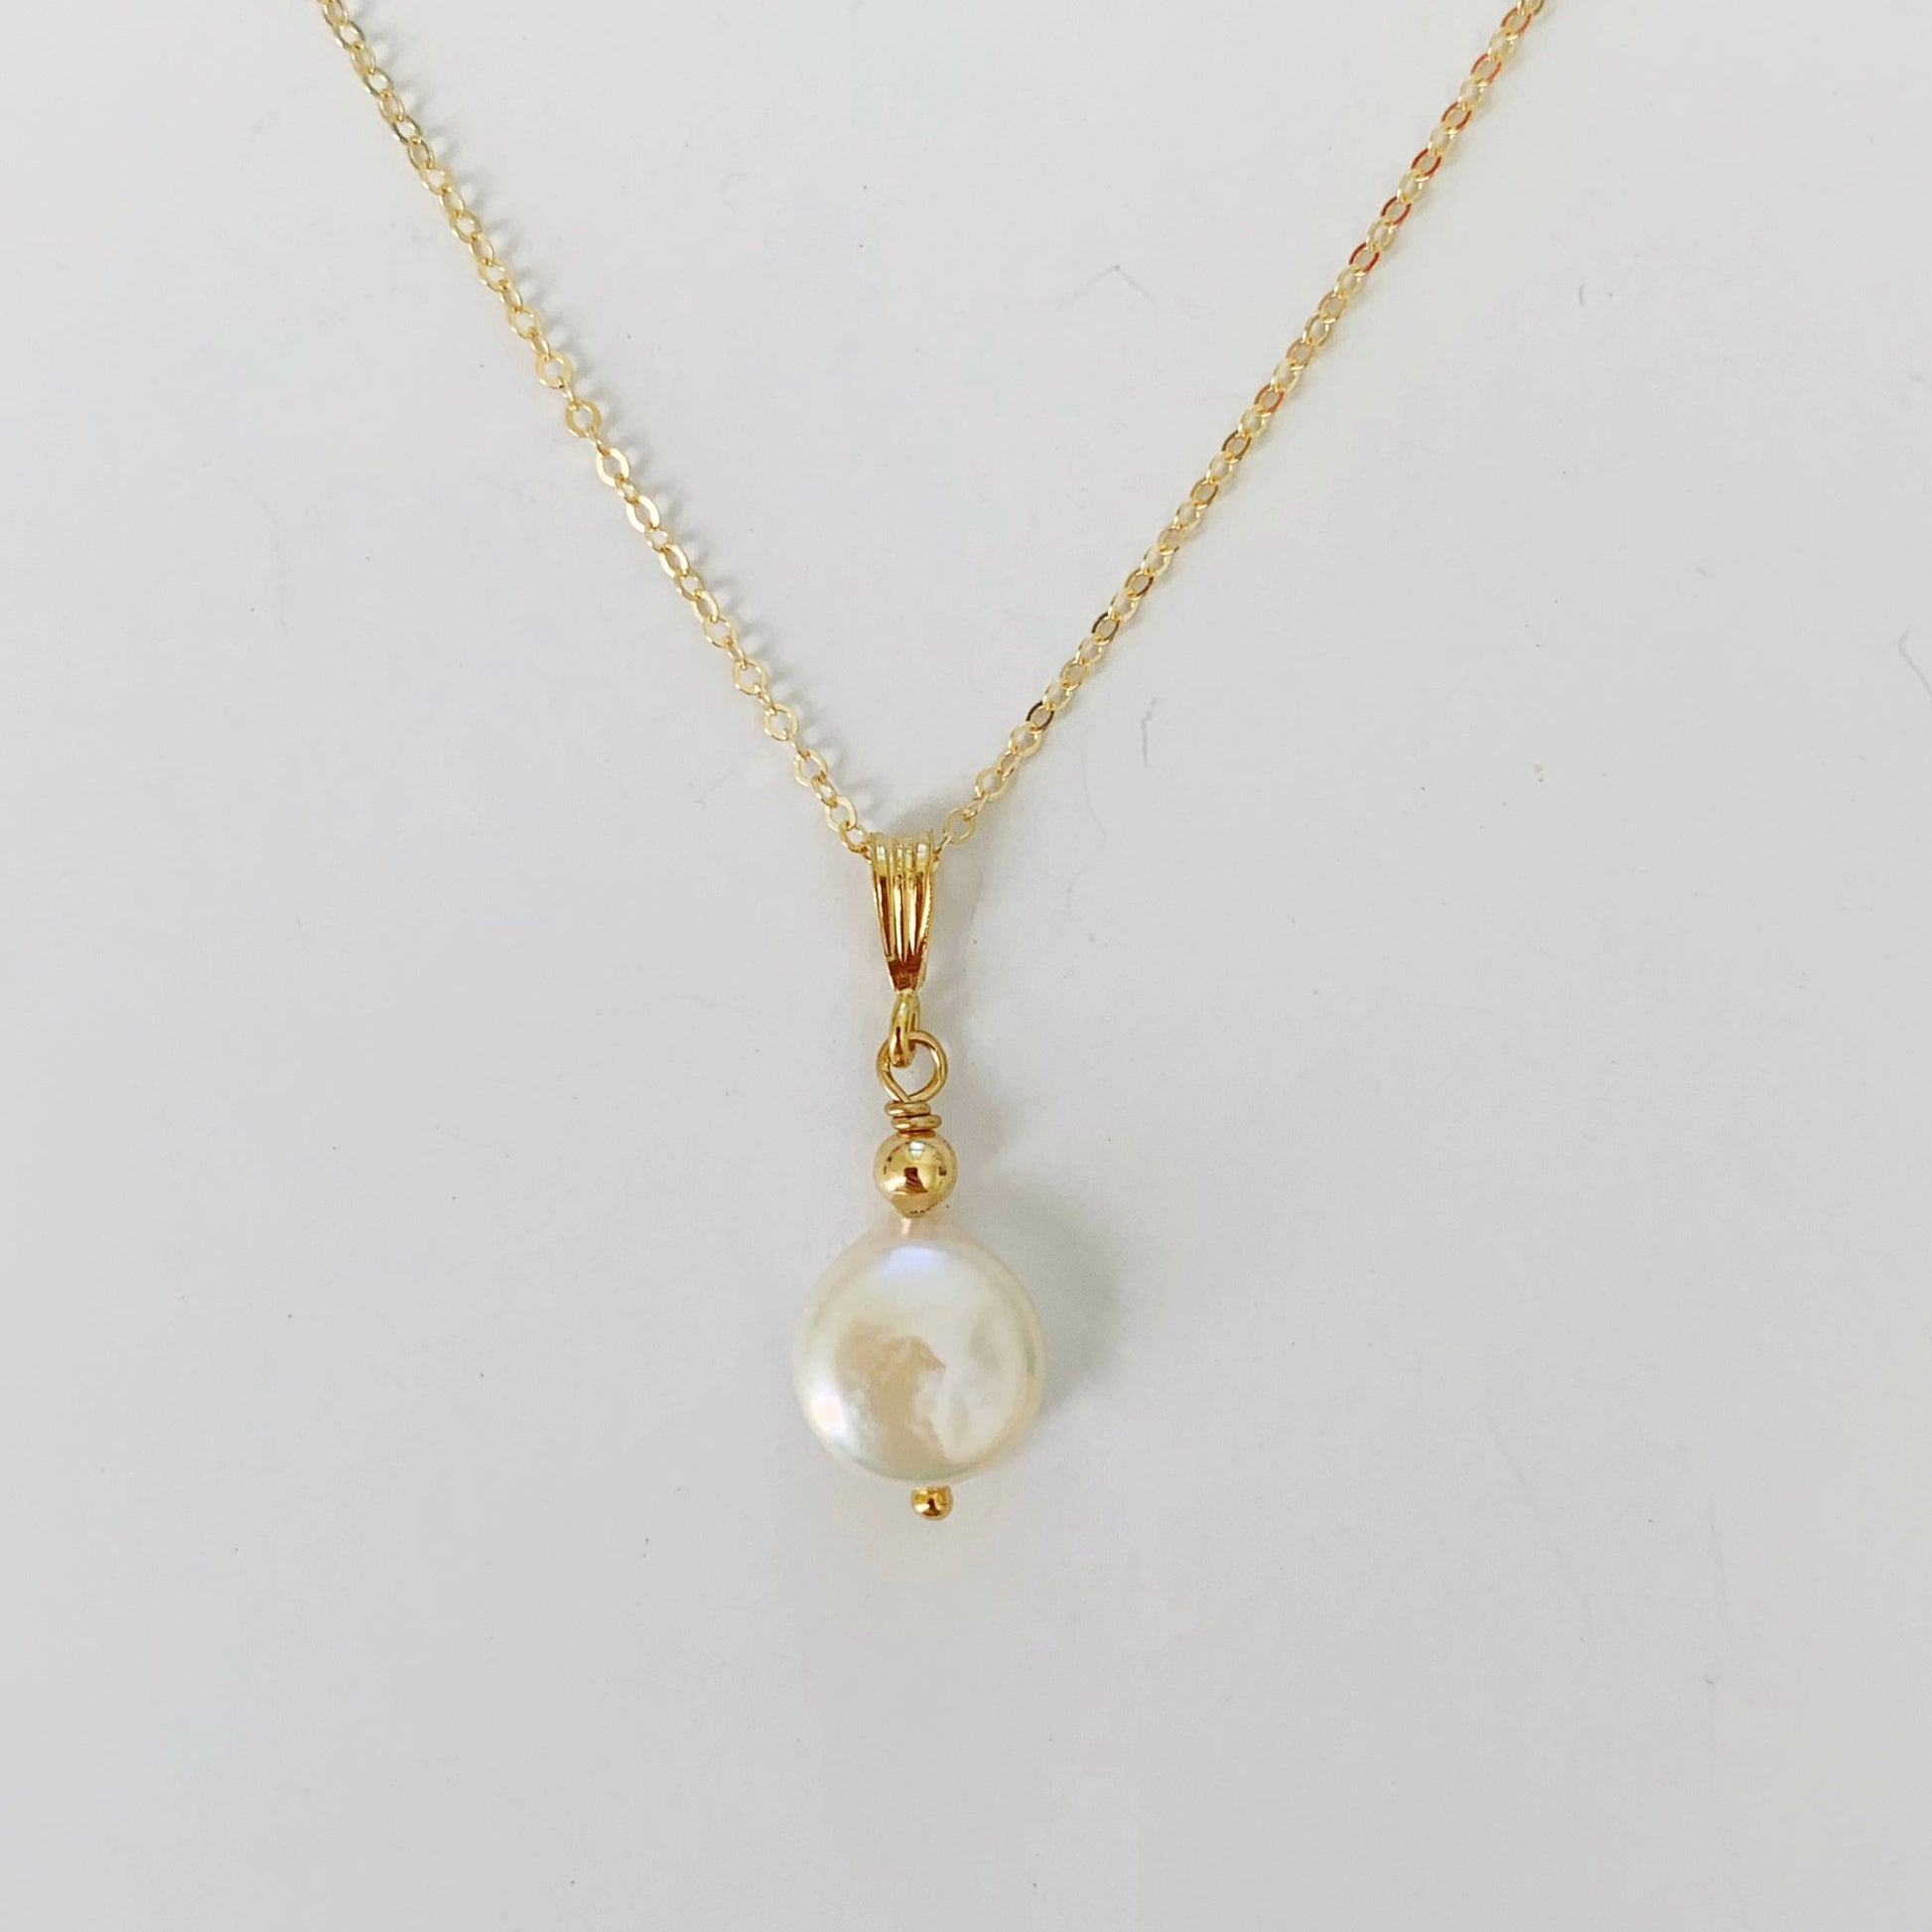 Newport Pearl Necklace is a freshwater coin pearl pendant with 14k gold filled findings and chain. this one is photographed on a white background